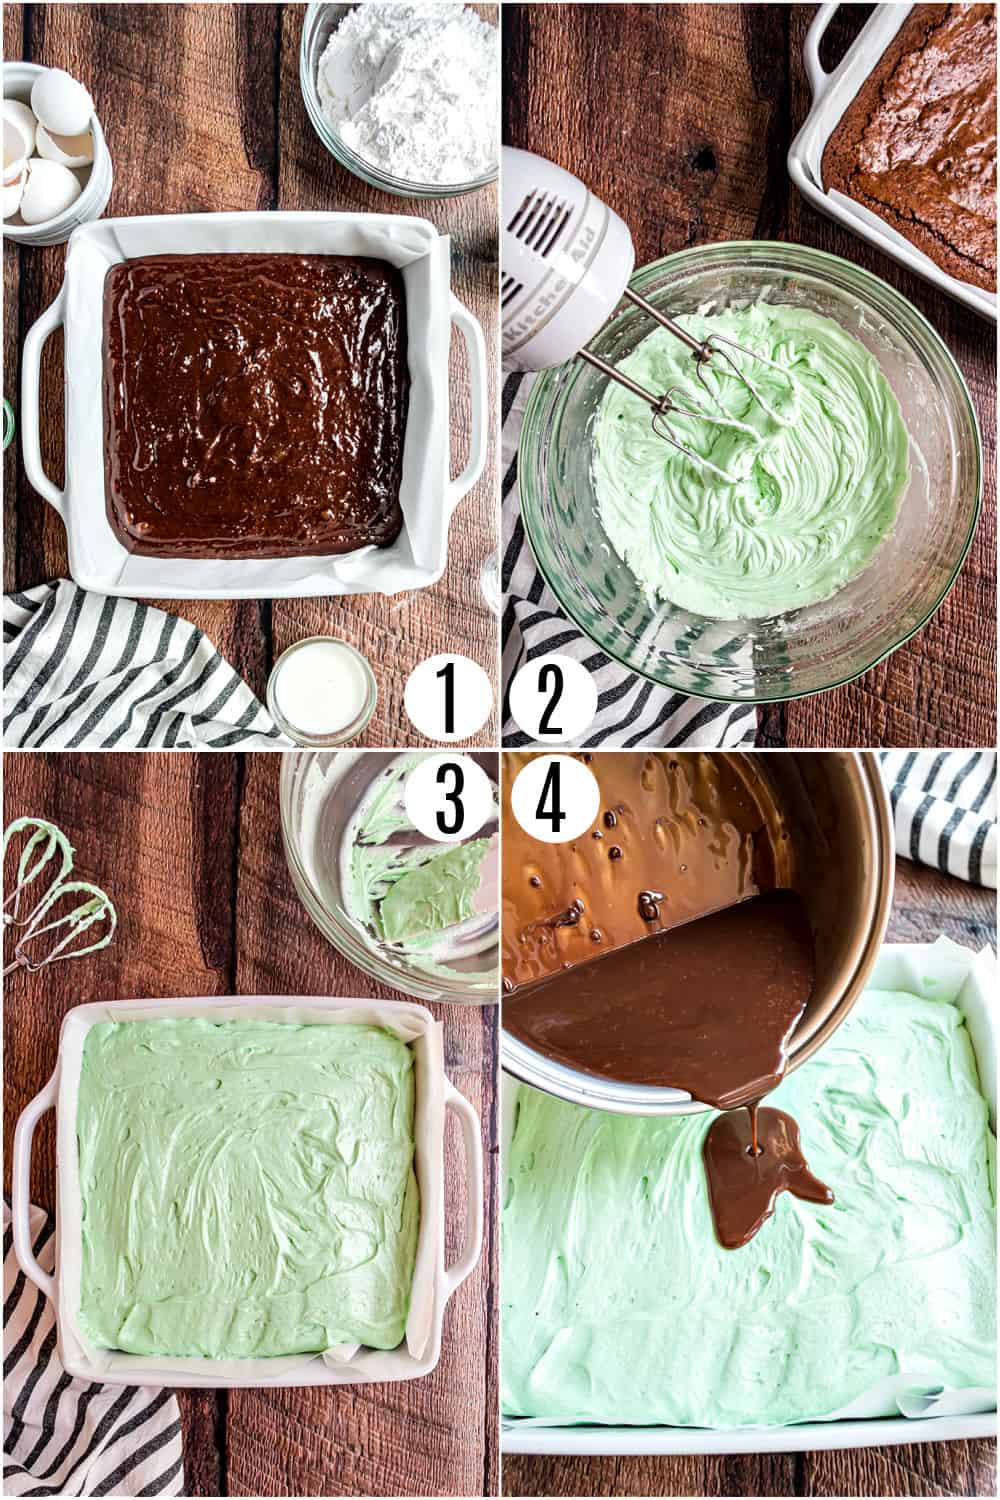 Step by step photos showing how to make chocolate mint brownies.